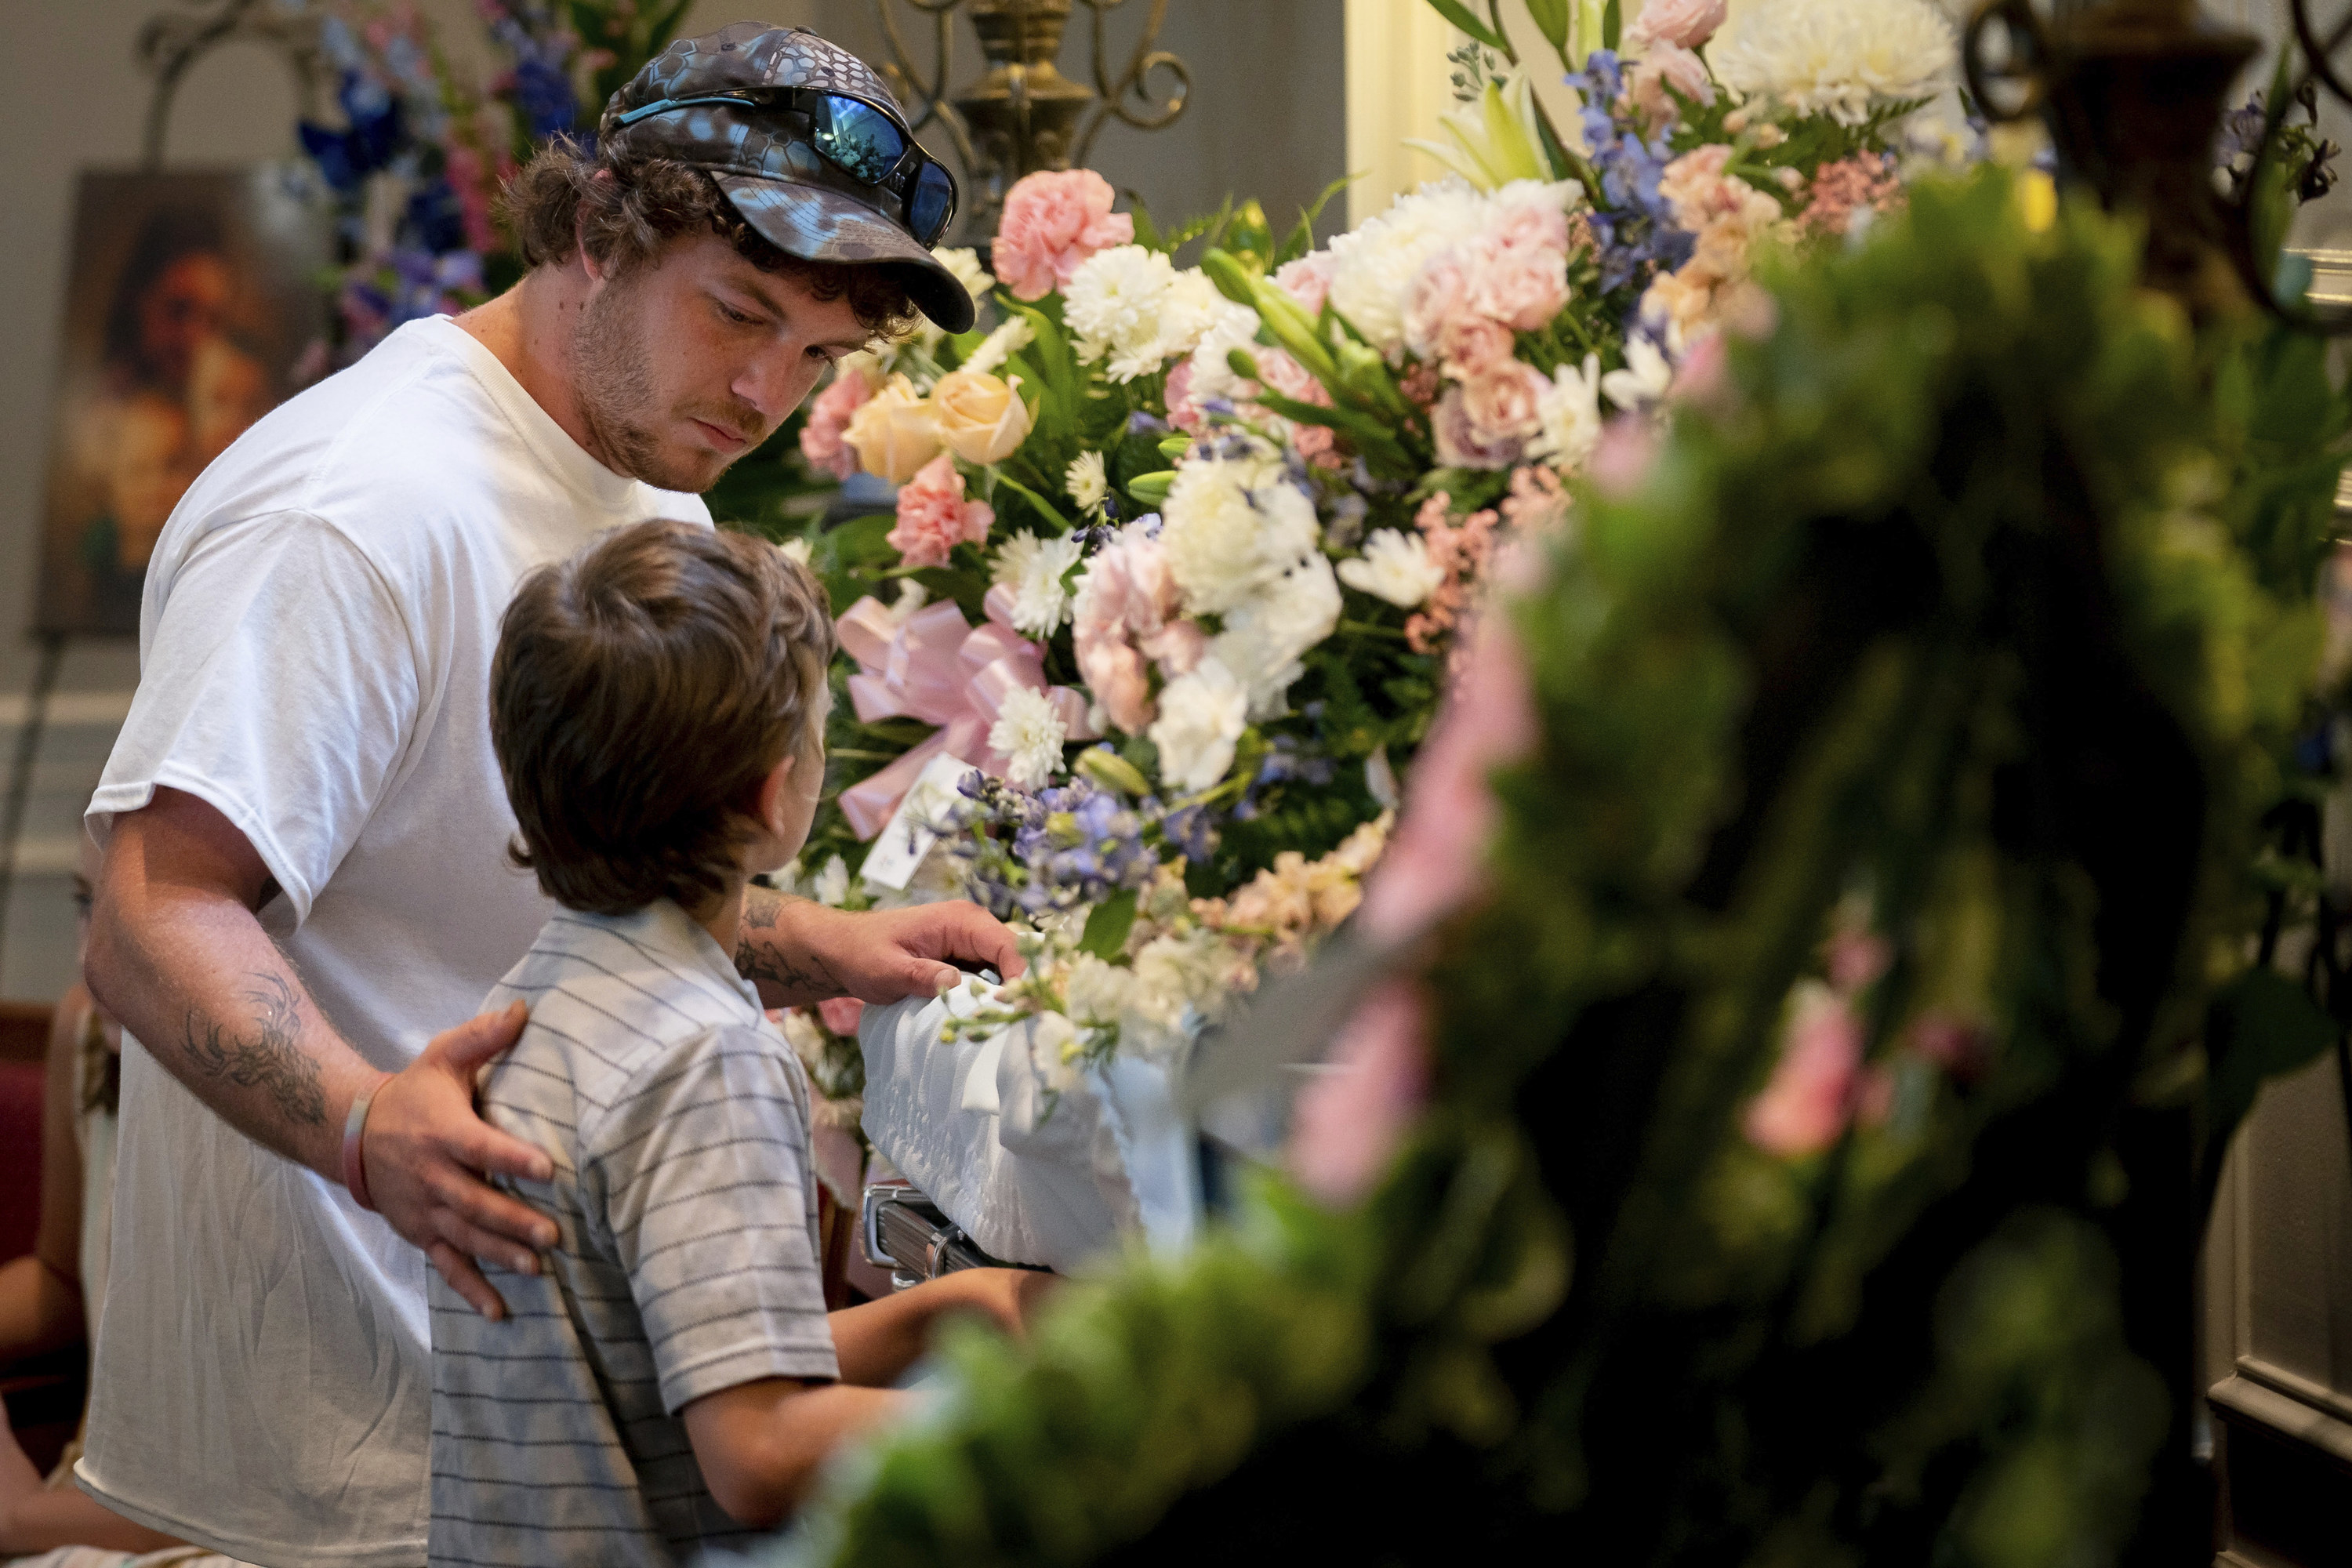 A man and young boy stand in front of a casket covered in flowers